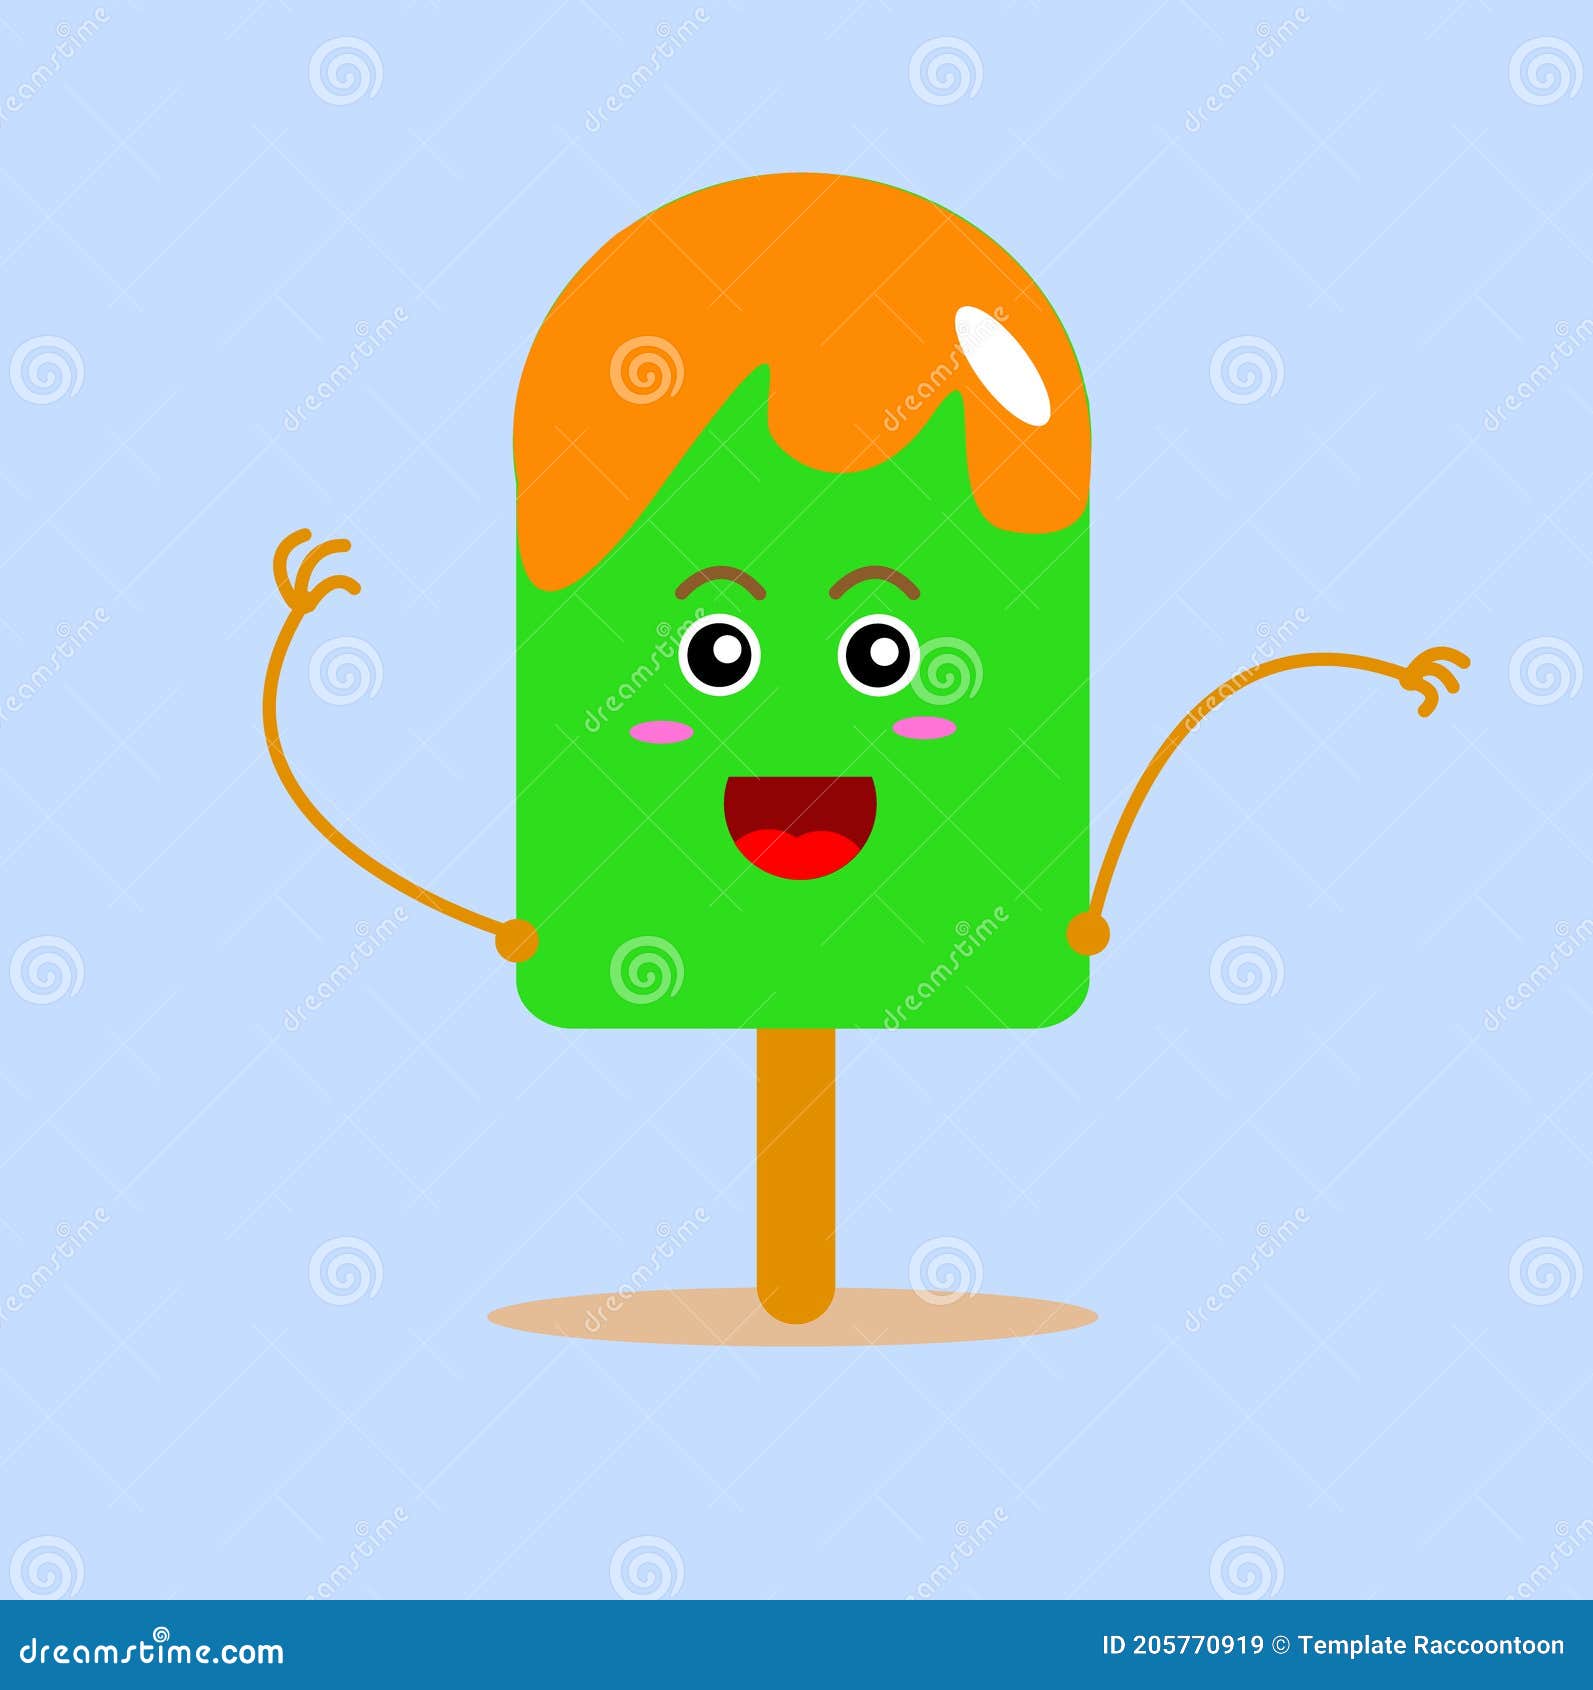 Ilustration vector grapich of green ice cream. This ilustration good for education in learning and megazine child